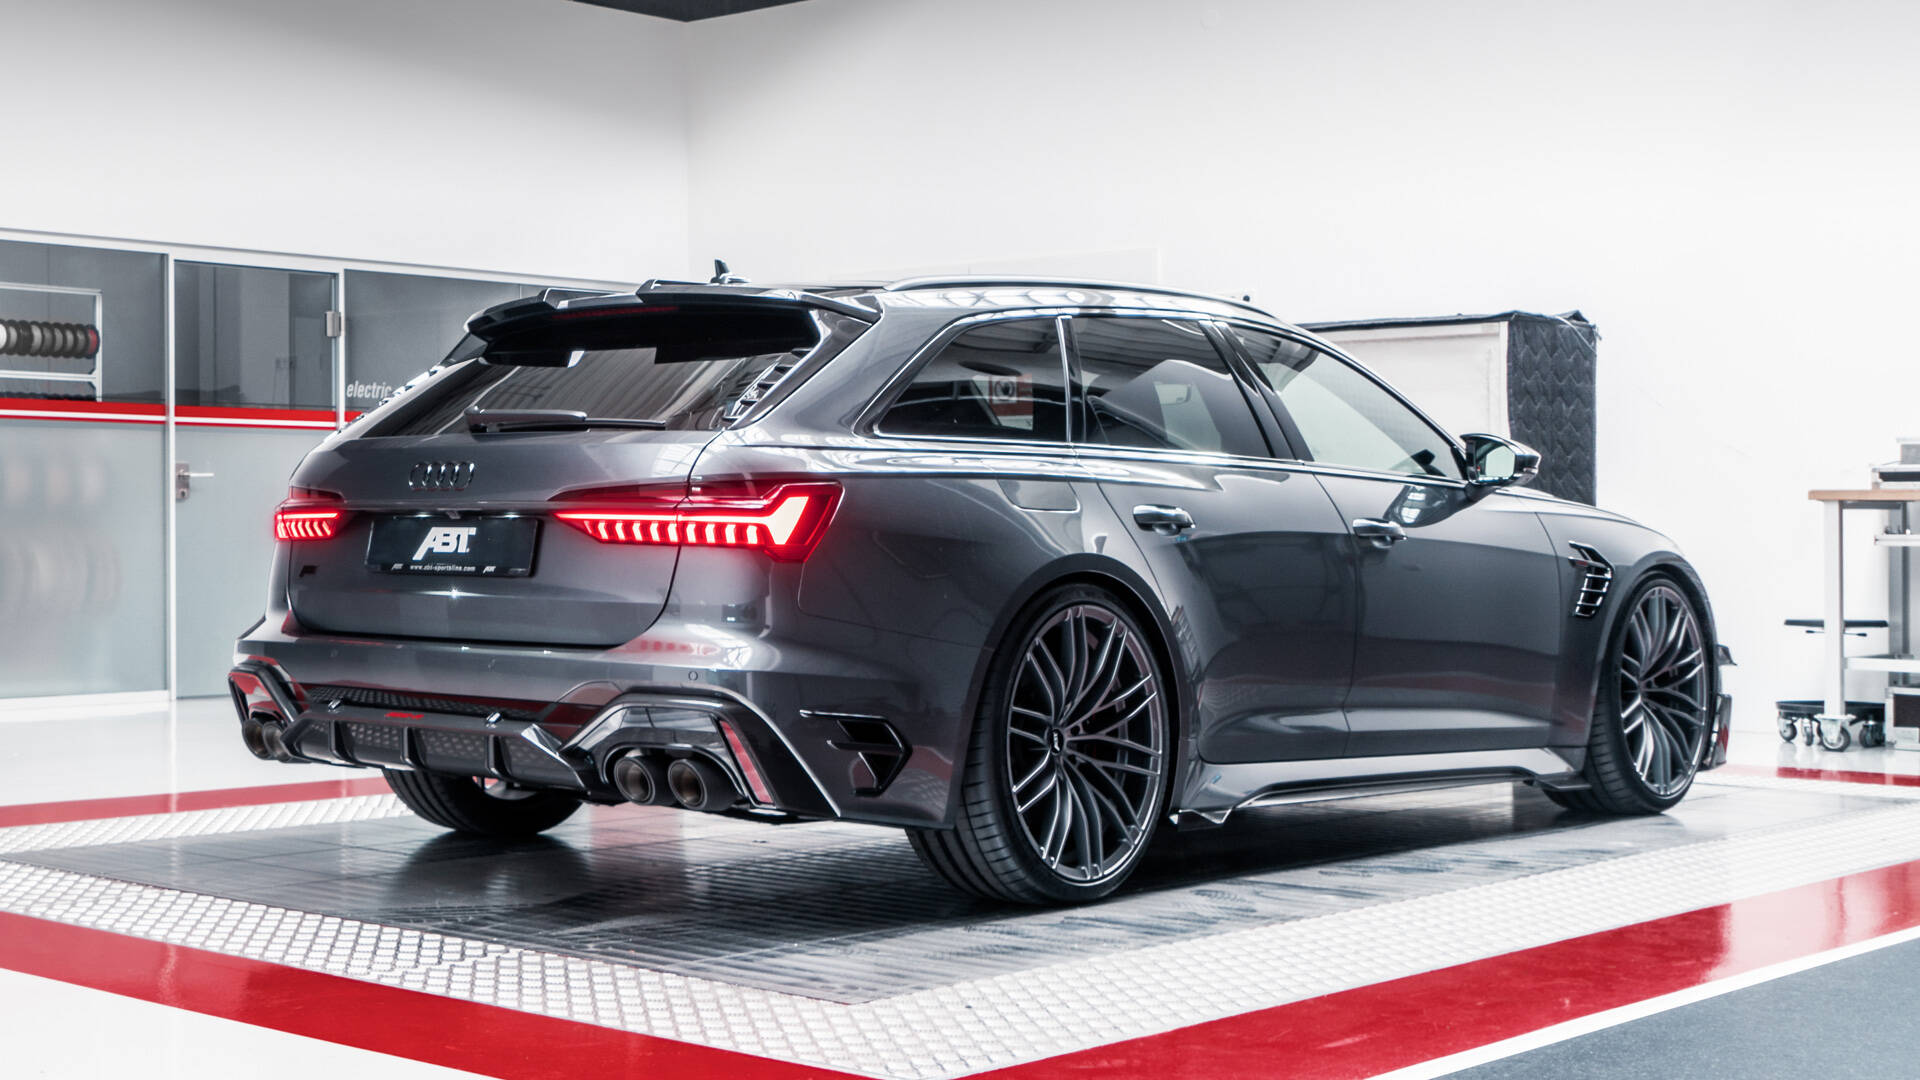 Legendary Audi RS 6 Avant transformed to Limited Edition ABT RS6-R - Audi  Tuning, VW Tuning, Chiptuning von ABT Sportsline.